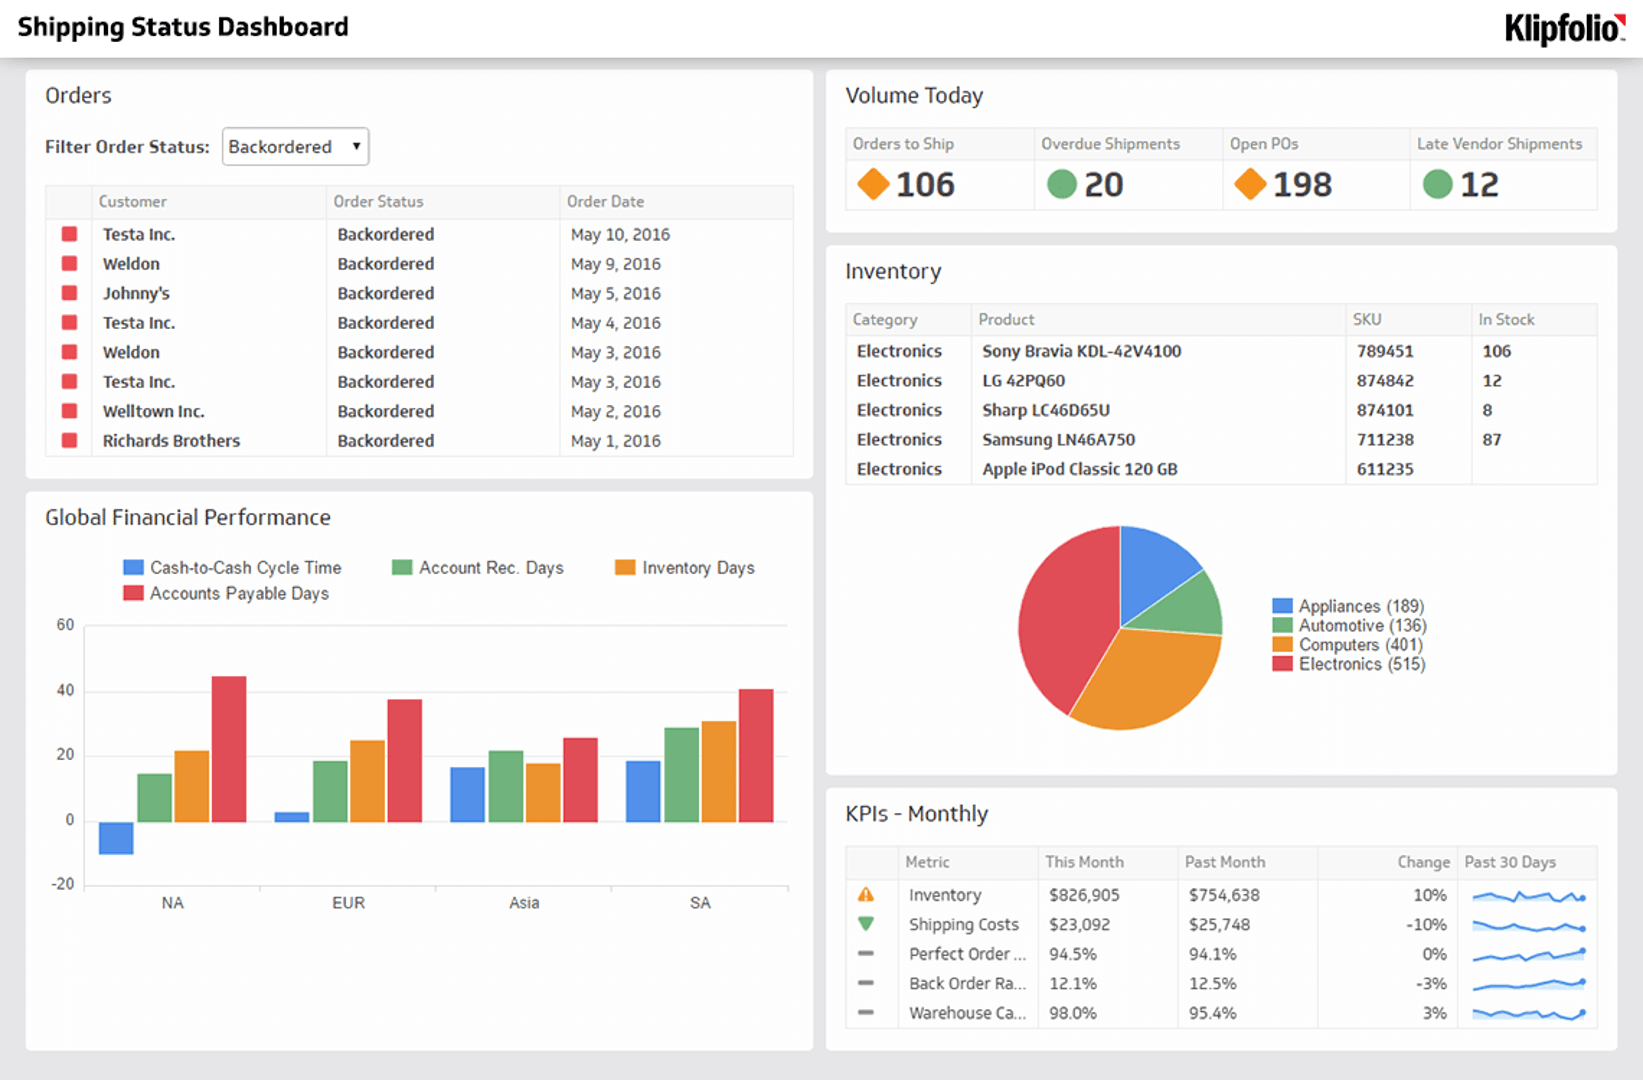 Supply Chain Dashboard Examples - Shipping Status Dashboard